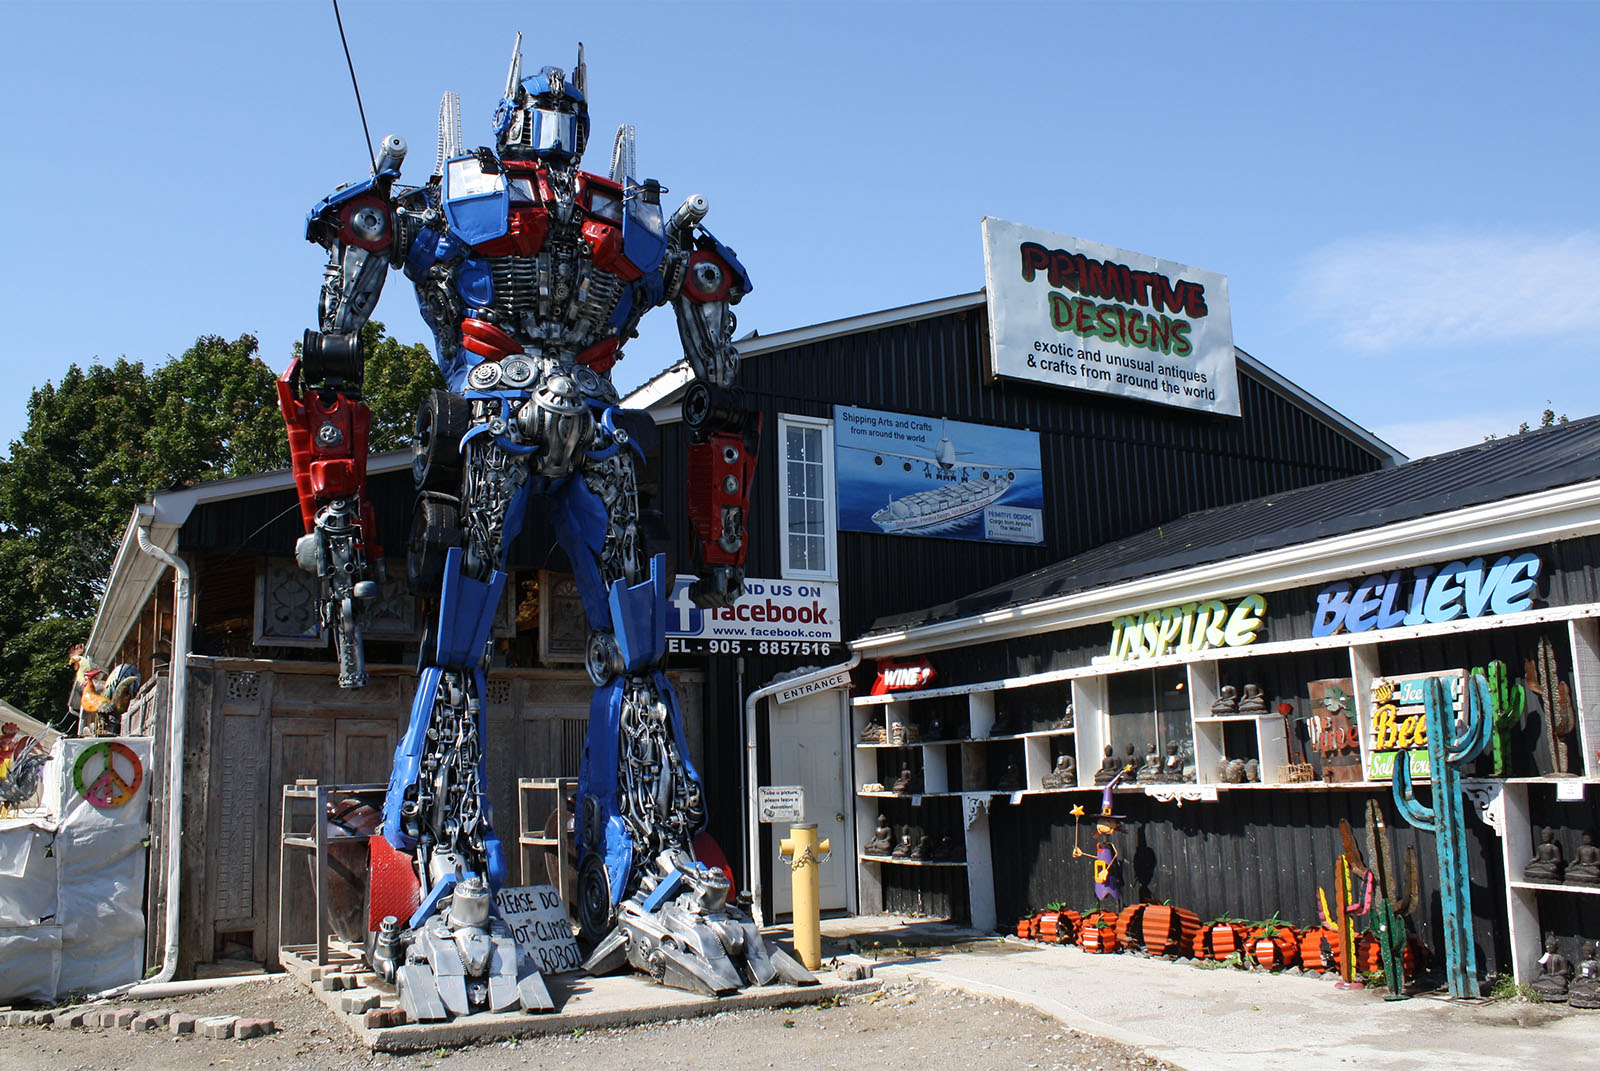 A large metal robot sculpture in front of a barn.